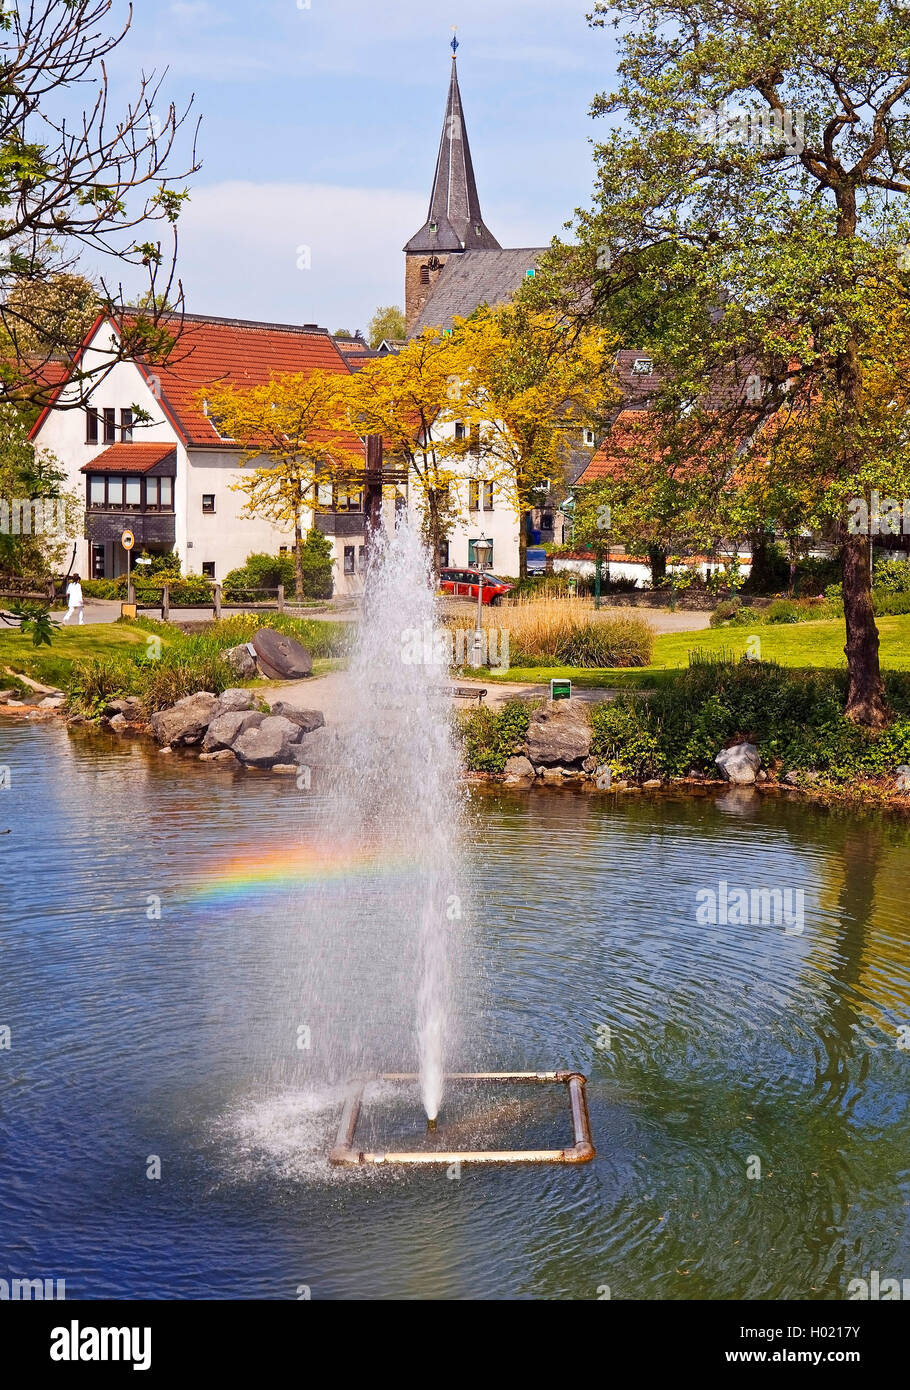 fountain and municipal church in the old city of Wuelfrath, Germany, North Rhine-Westphalia, Bergisches Land, Wuelfrath Stock Photo